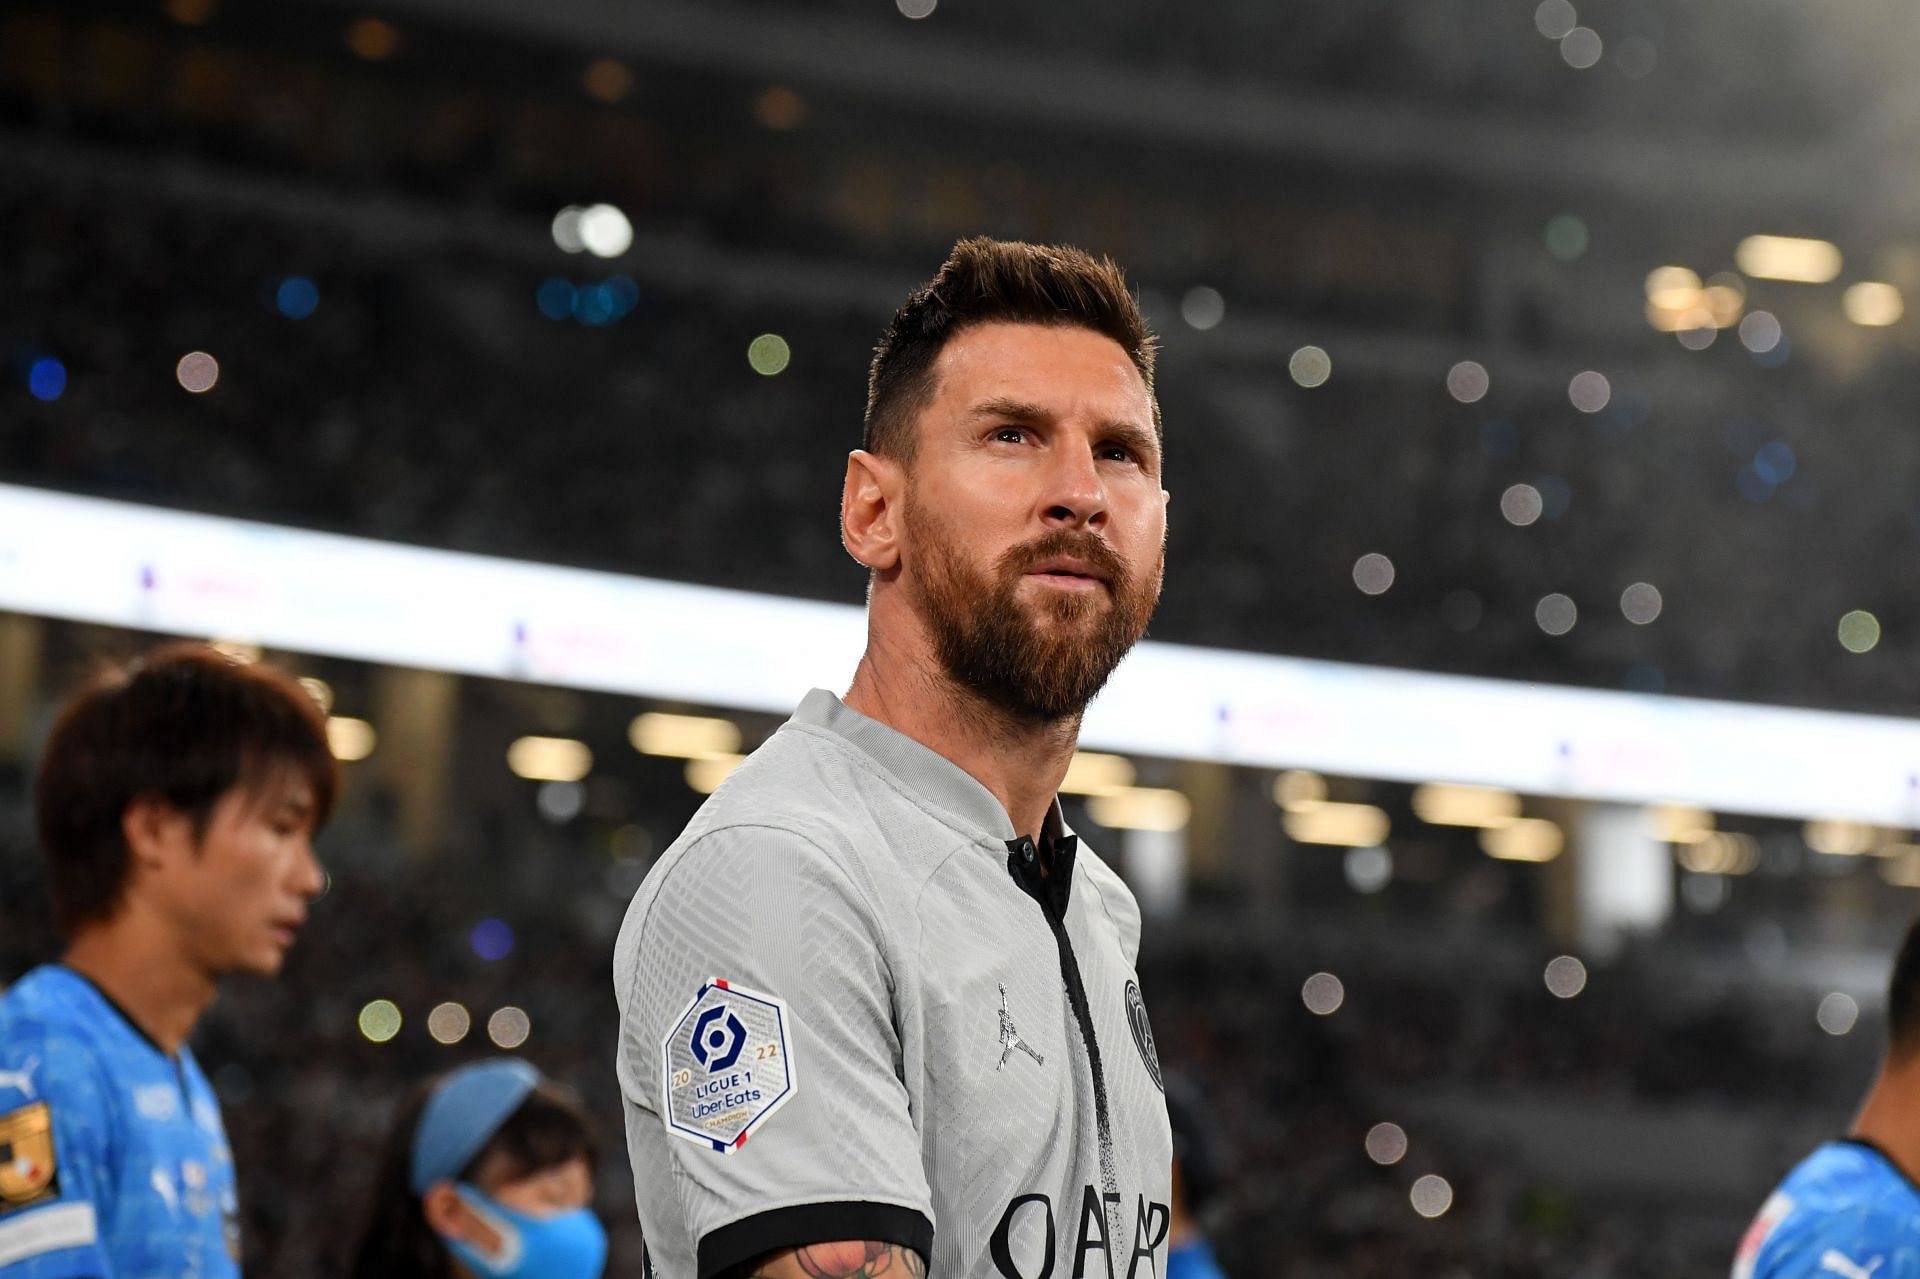 All eyes are on Lionel Messi ahead of the World Cup